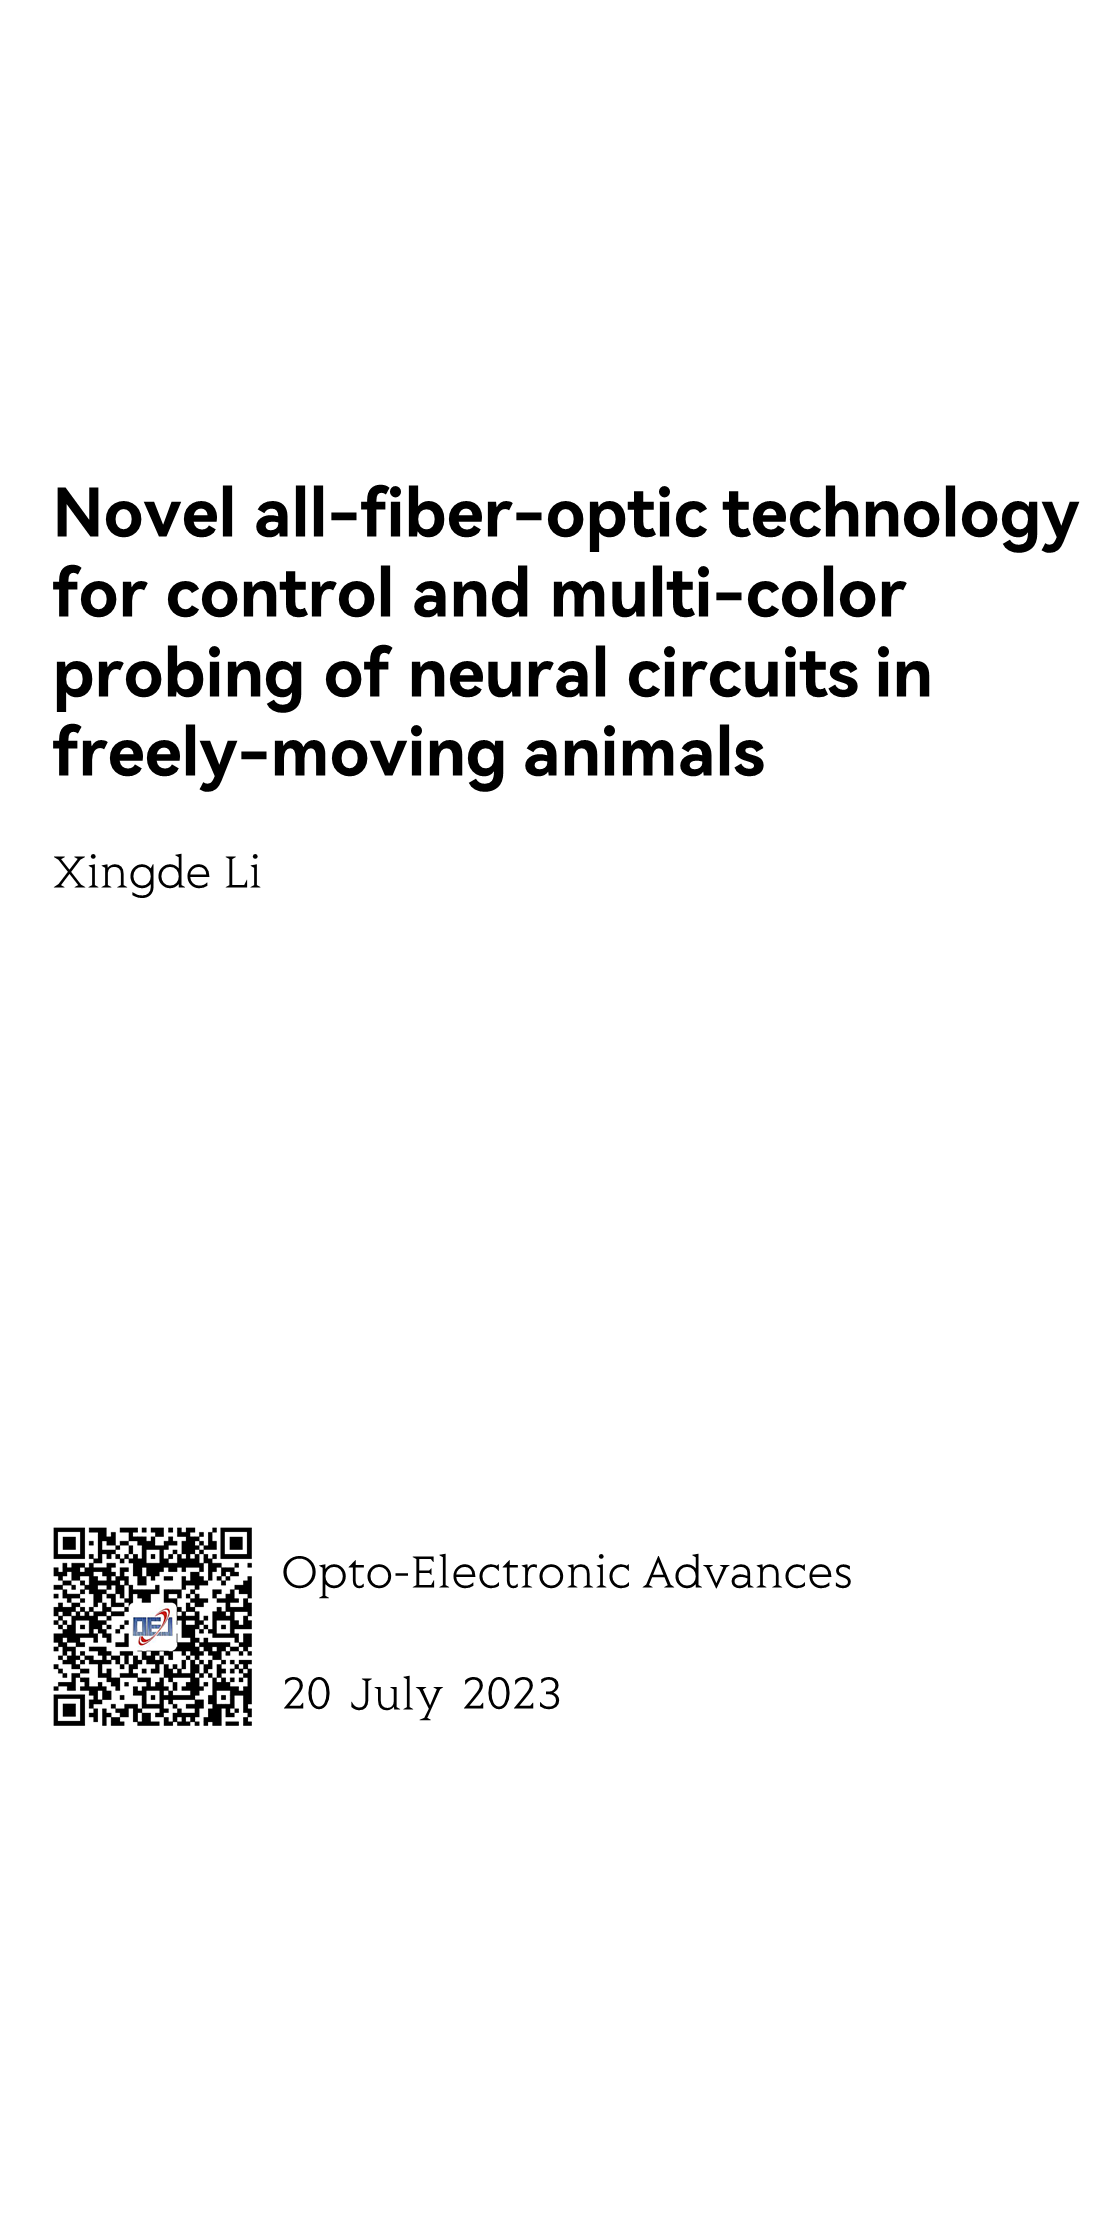 Novel all-fiber-optic technology for control and multi-color probing of neural circuits in freely-moving animals_1